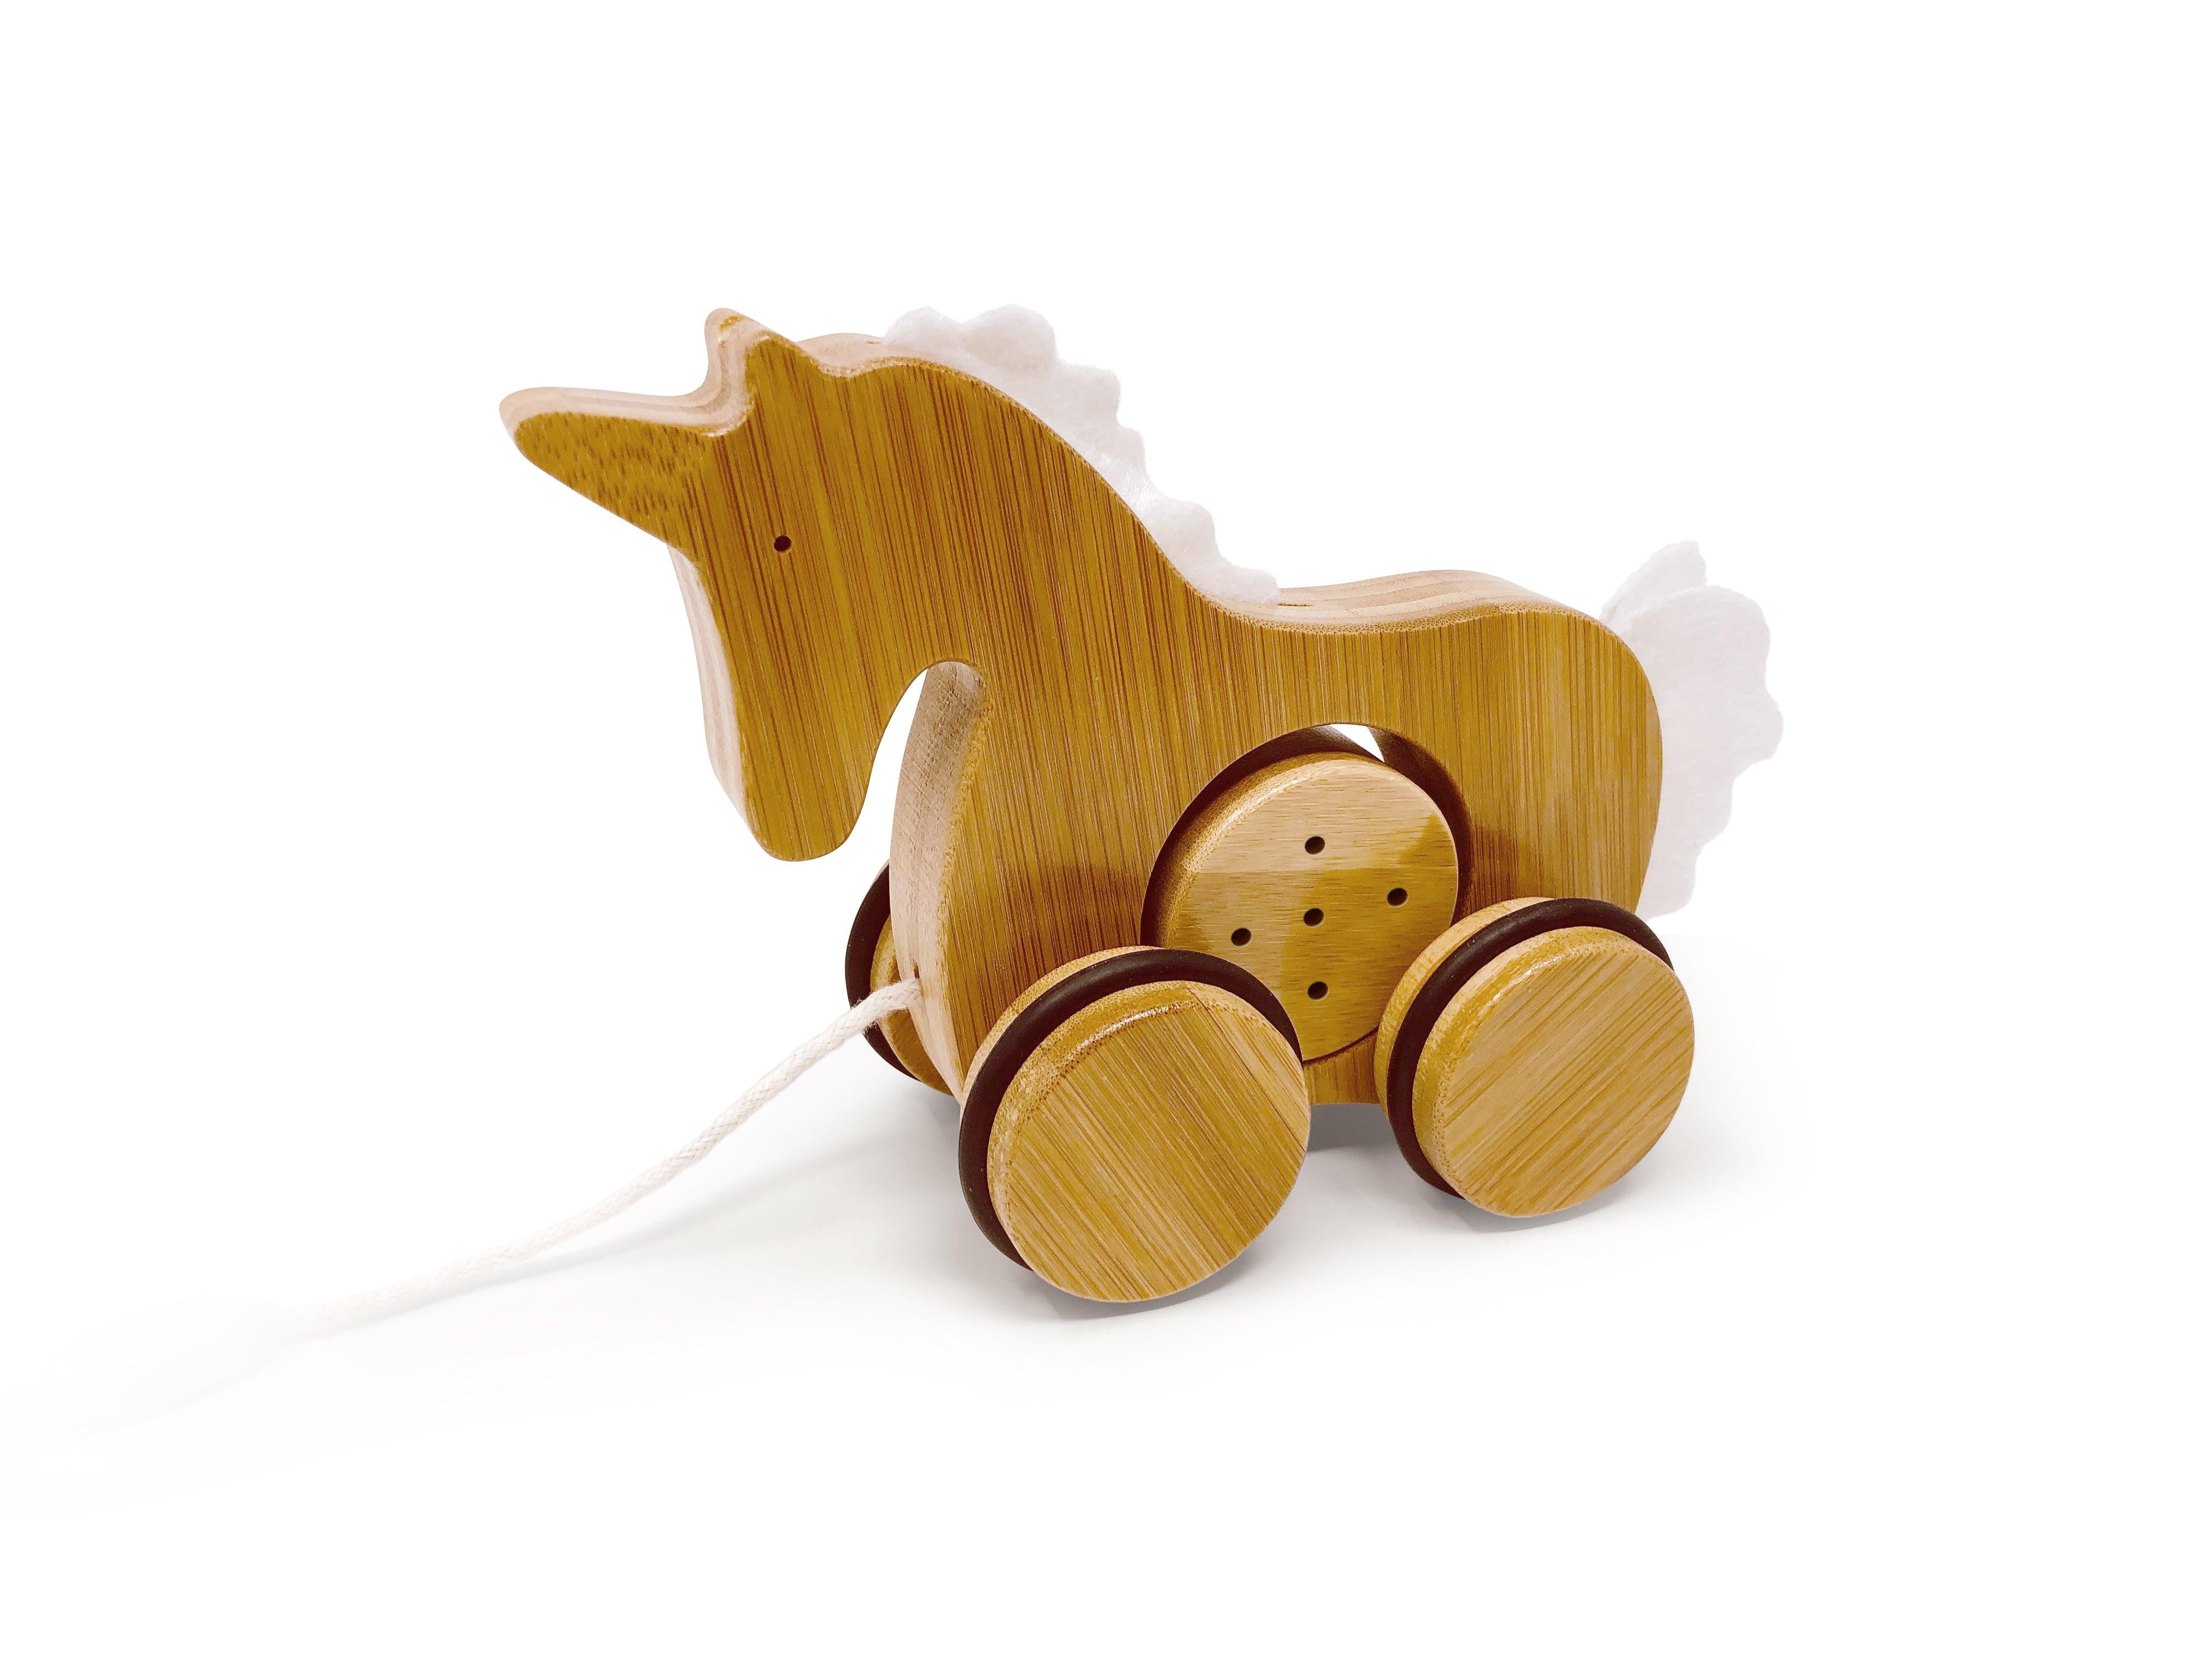 Sustainable wooden toys - eco friendly - push and pull toy - bamboo - rubber rimmed wheels - safety release mechanism - toddlers - playtoy - Kinderfeets New Zealand - Unicorn